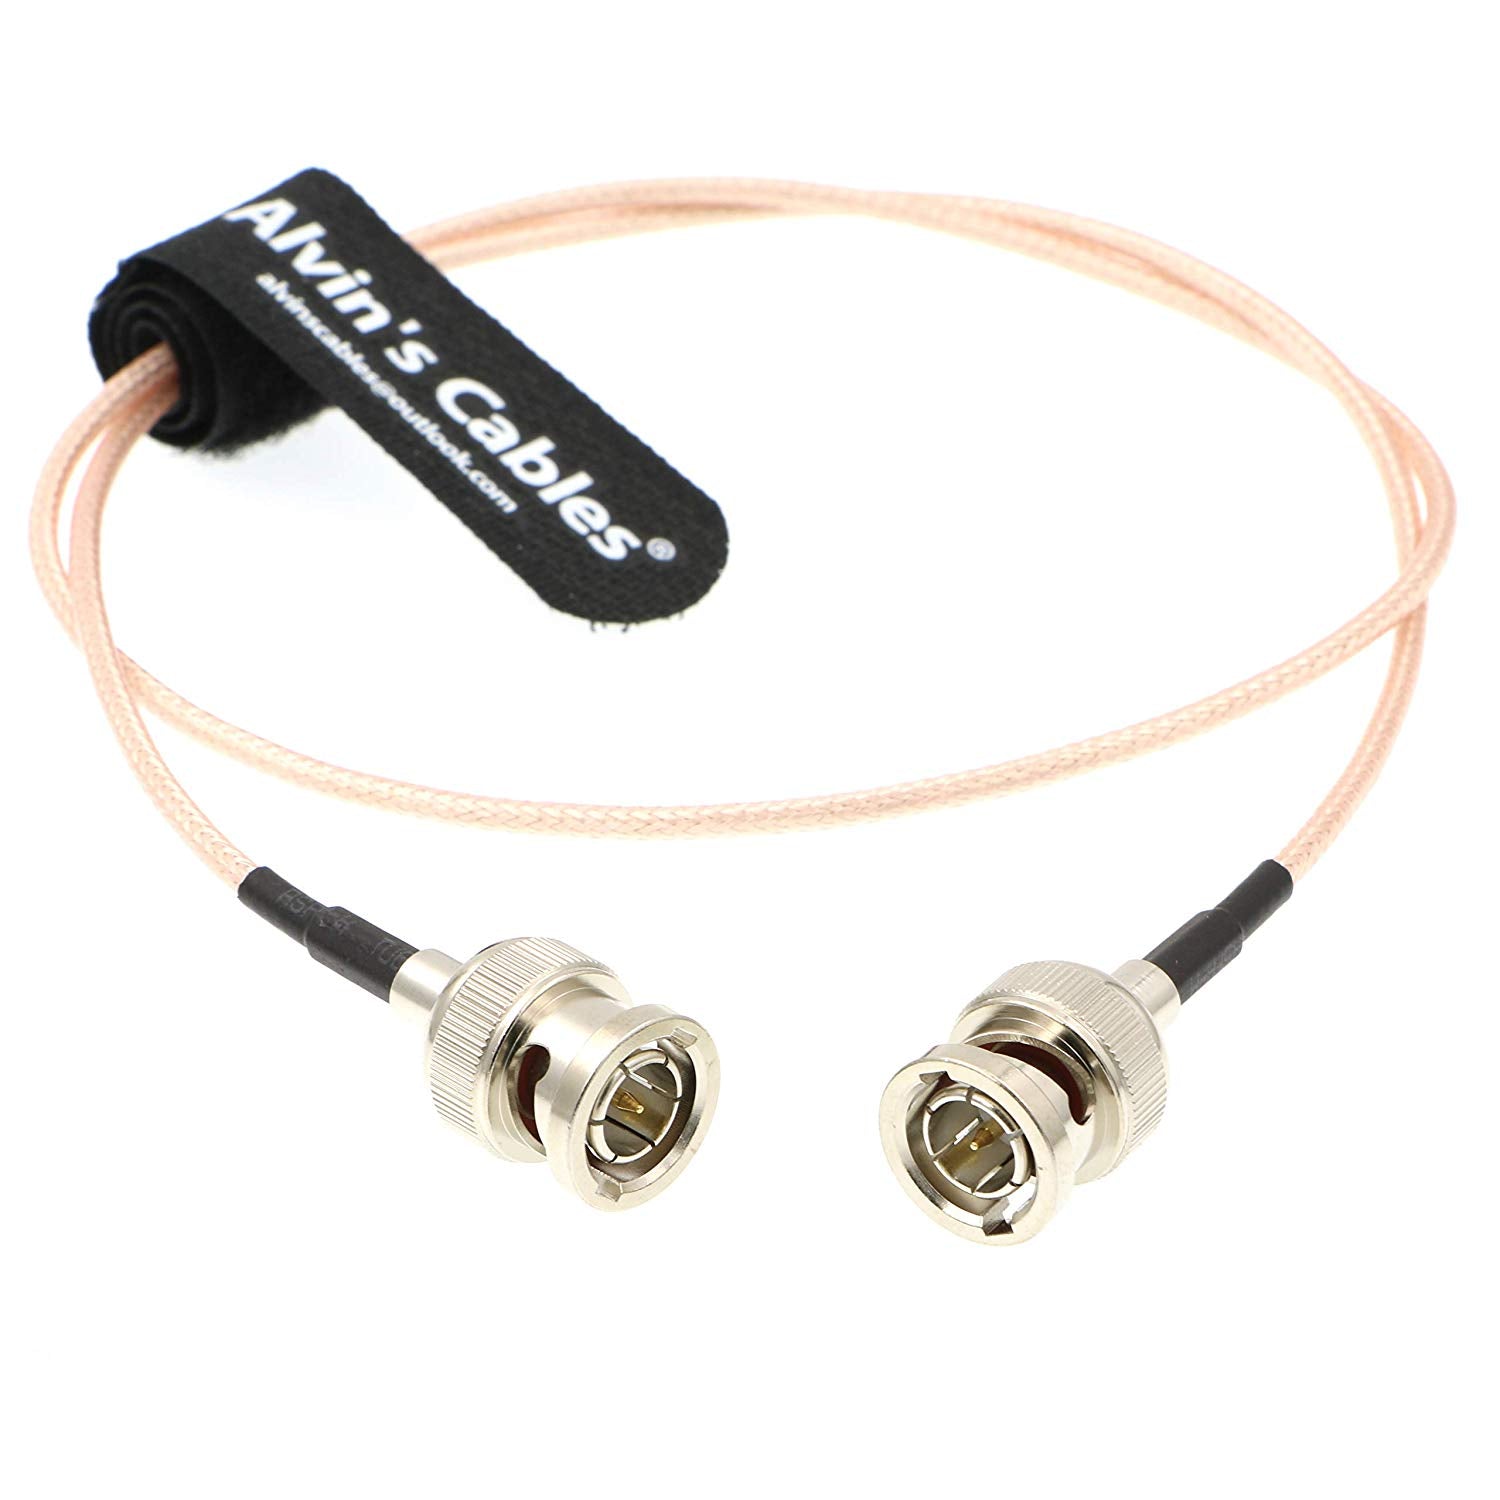 Alvin’s Cables HD SDI Video Cable BNC Male to Male for BMCC Video Out Blackmagic Camera